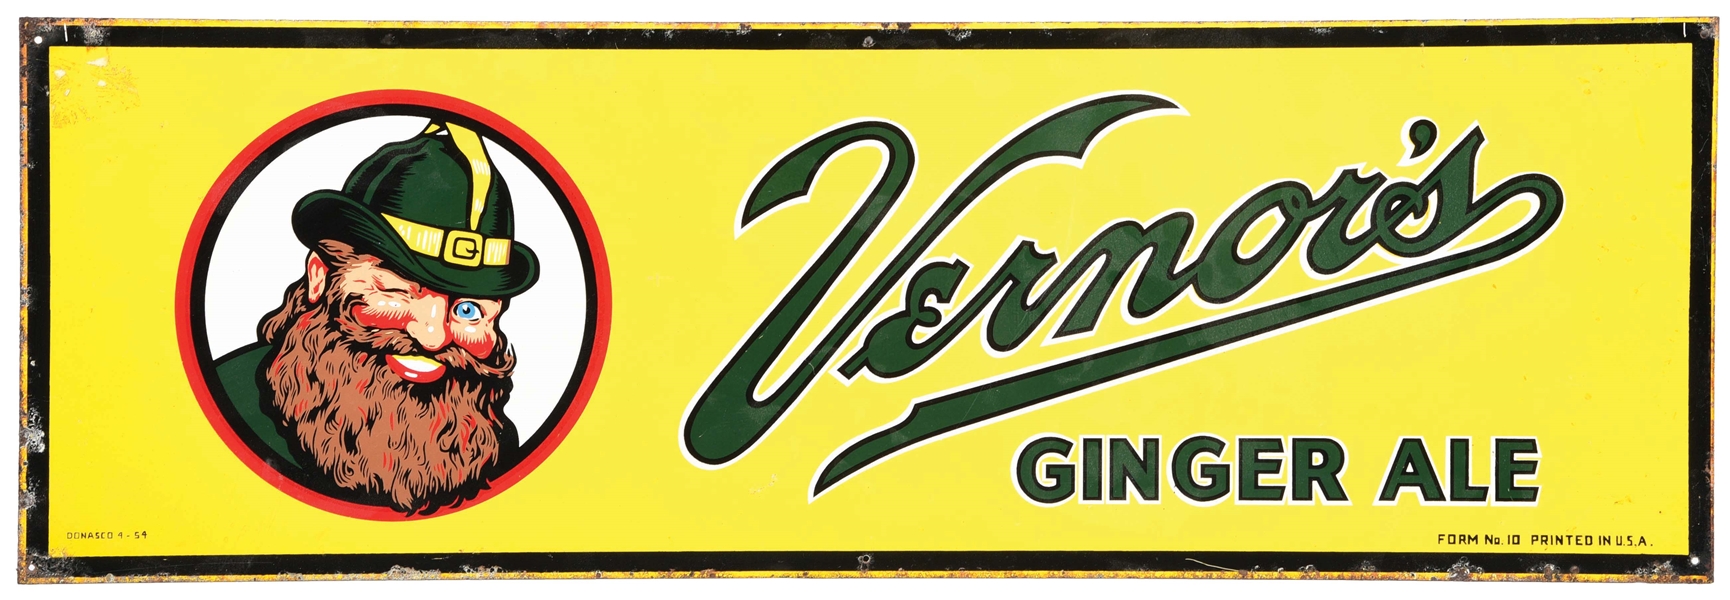 VERNORS GINGER ALE TIN SIGN W/ GNOME GRAPHIC.